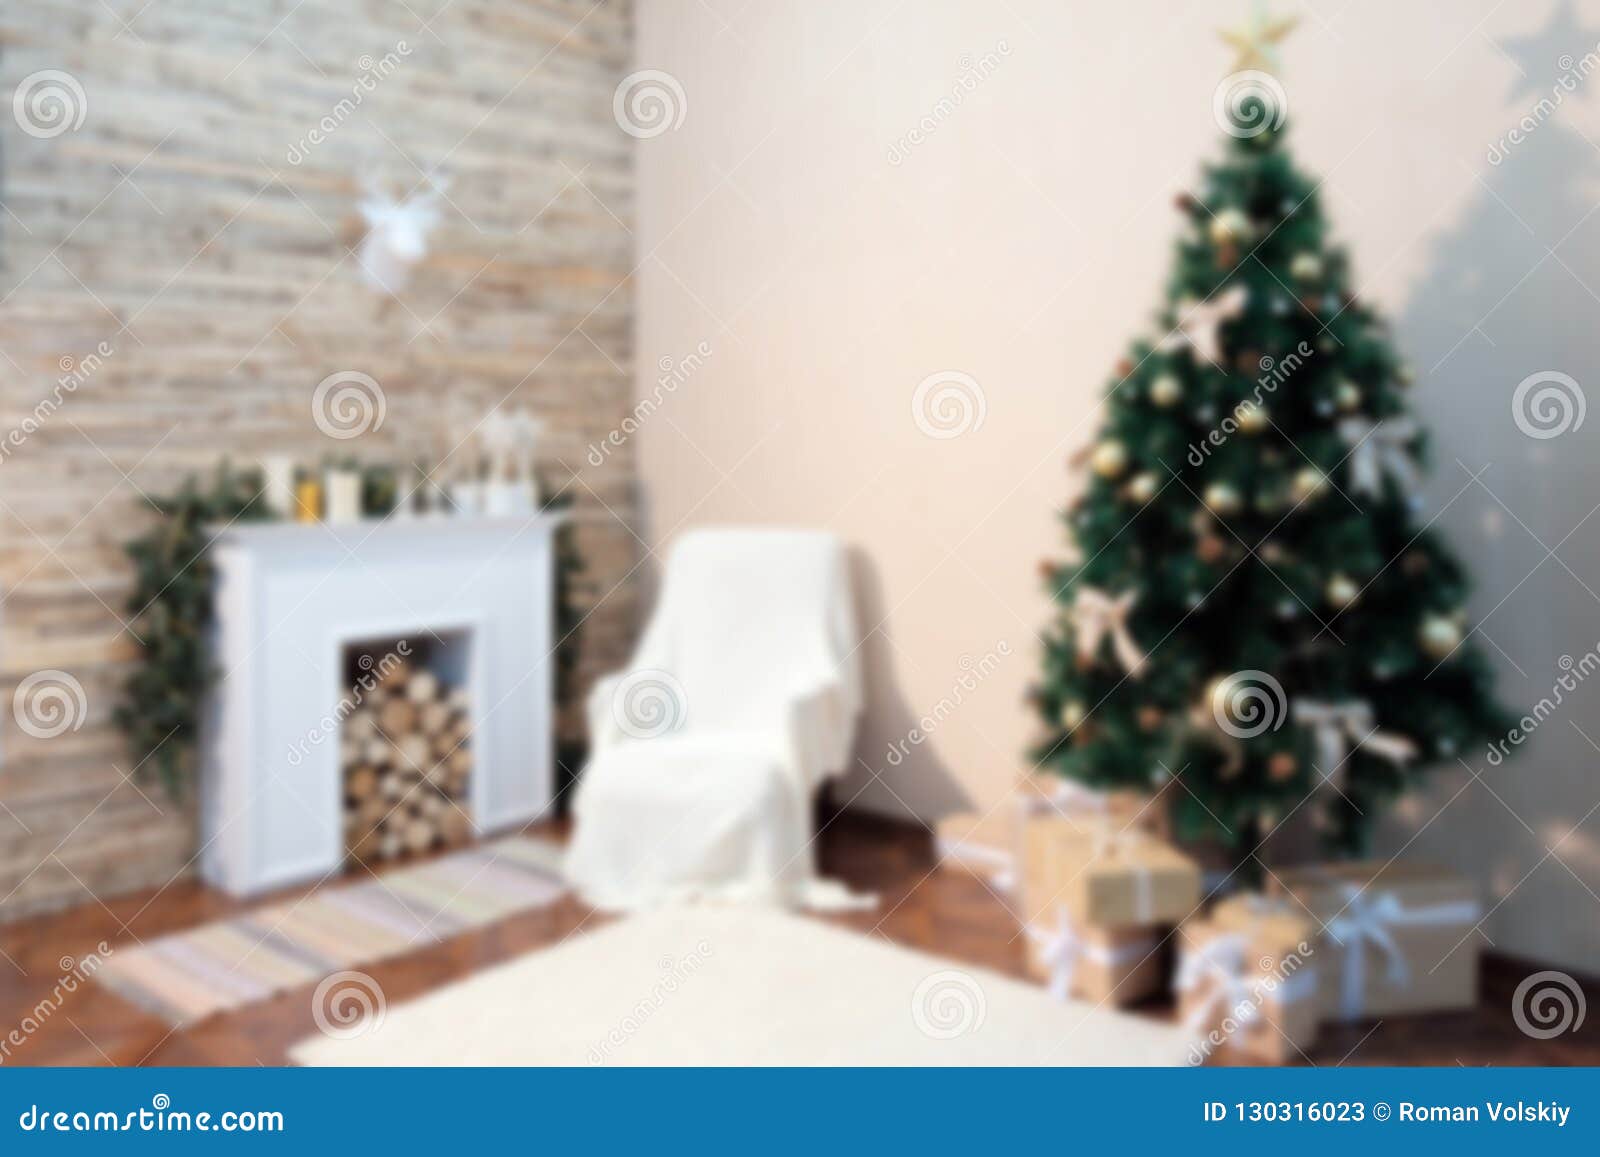 Blur. a Room with a Fireplace, a Christmas Tree and a White Background ...